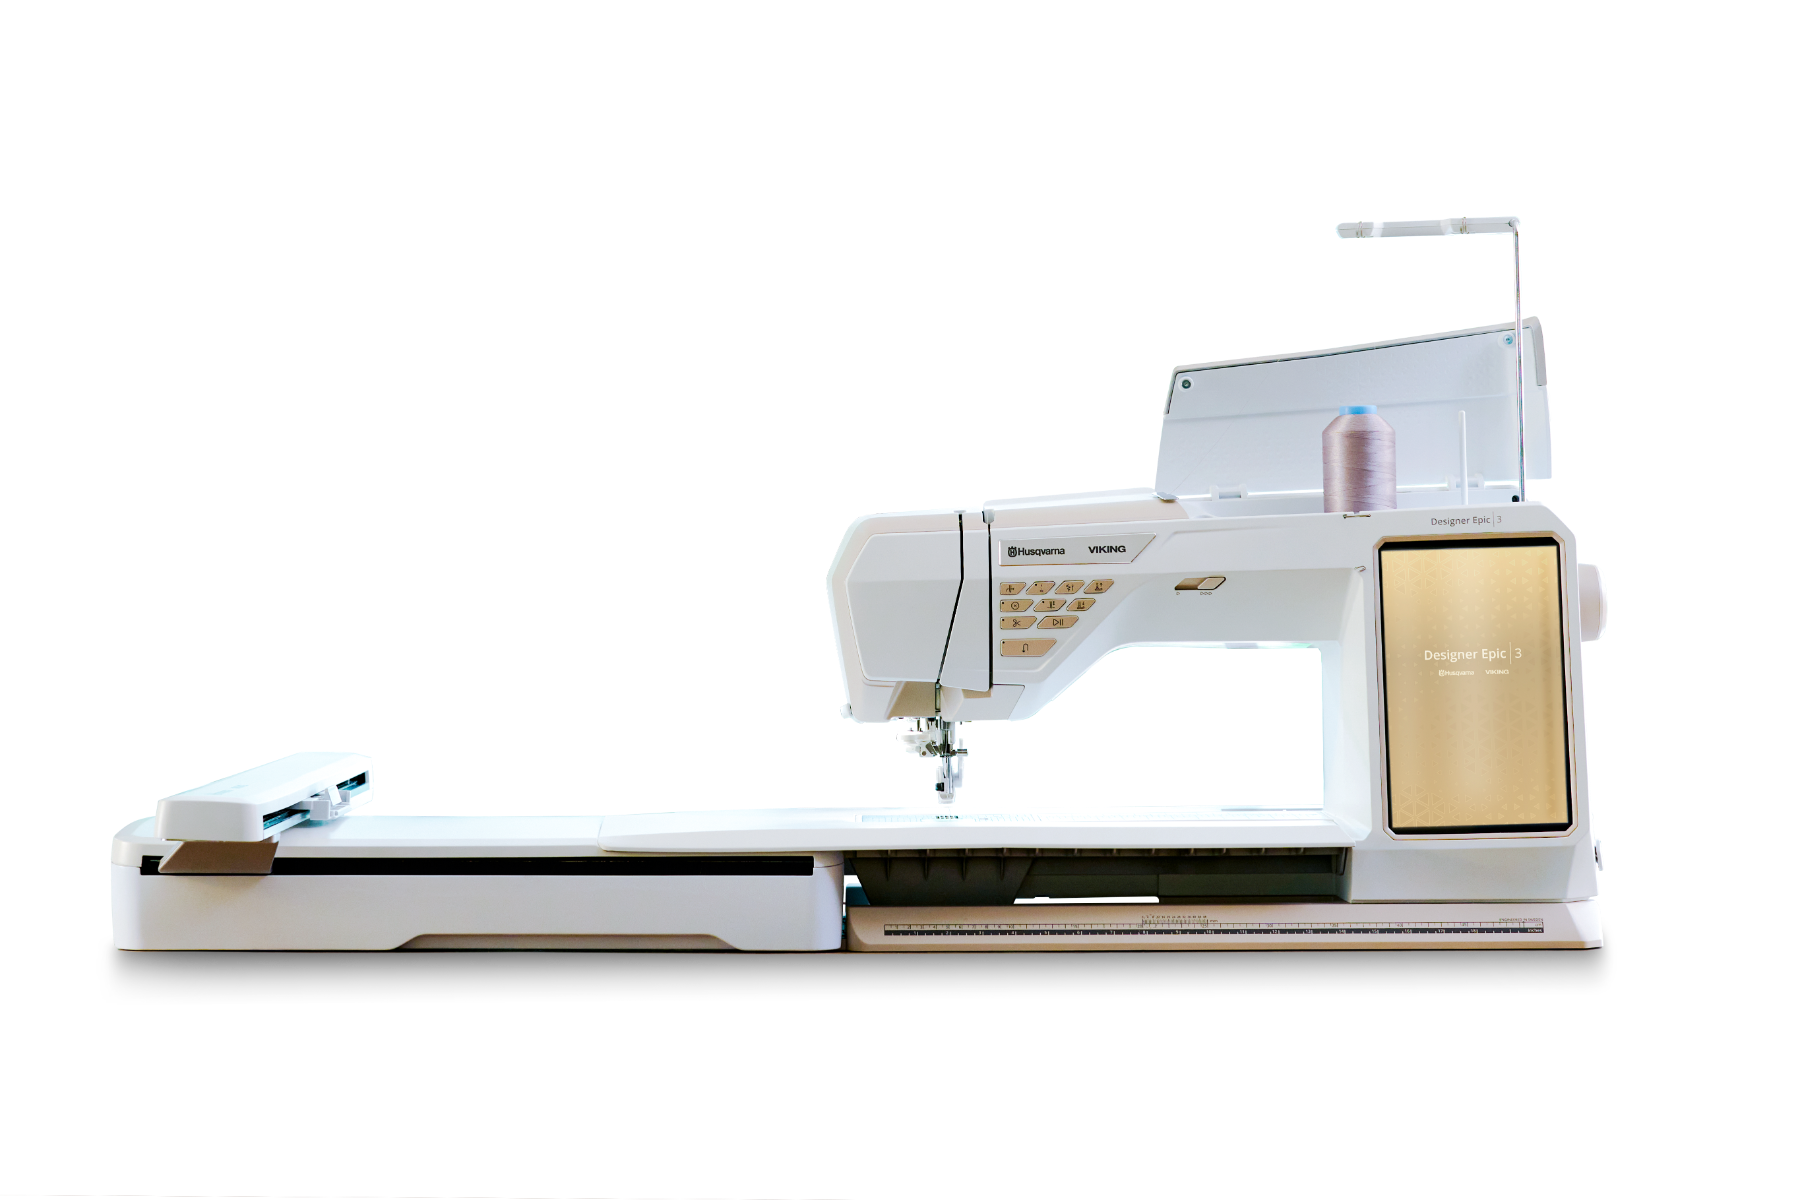 Viking Designer Epic 3 Sewing and Embroidery Machine